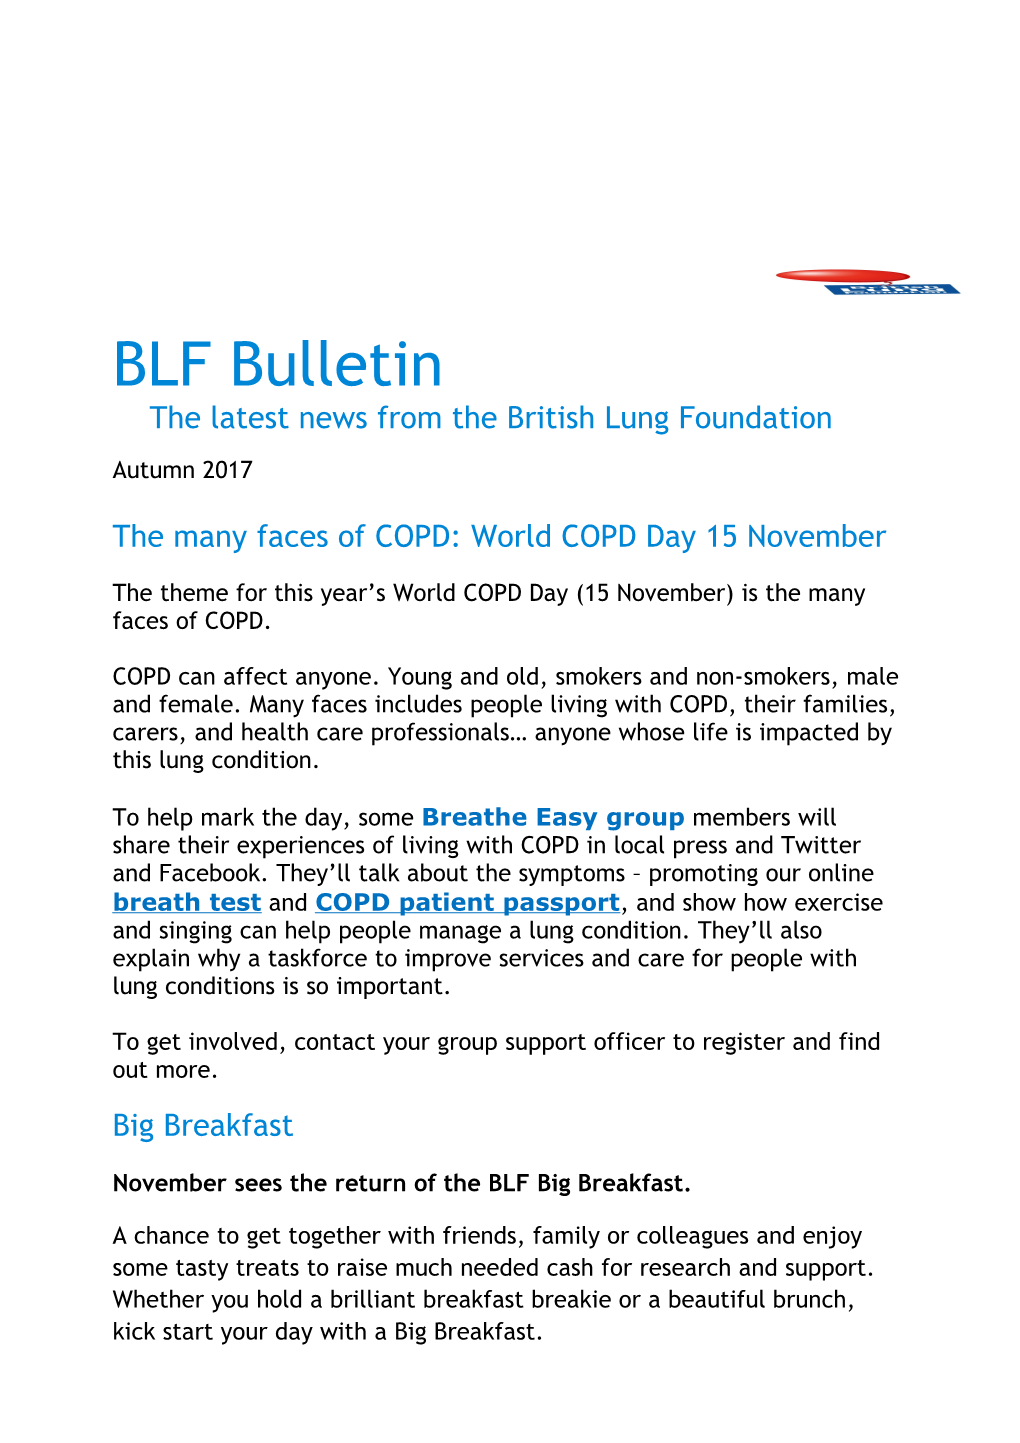 BLF Bulletinthe Latest News from the British Lung Foundation